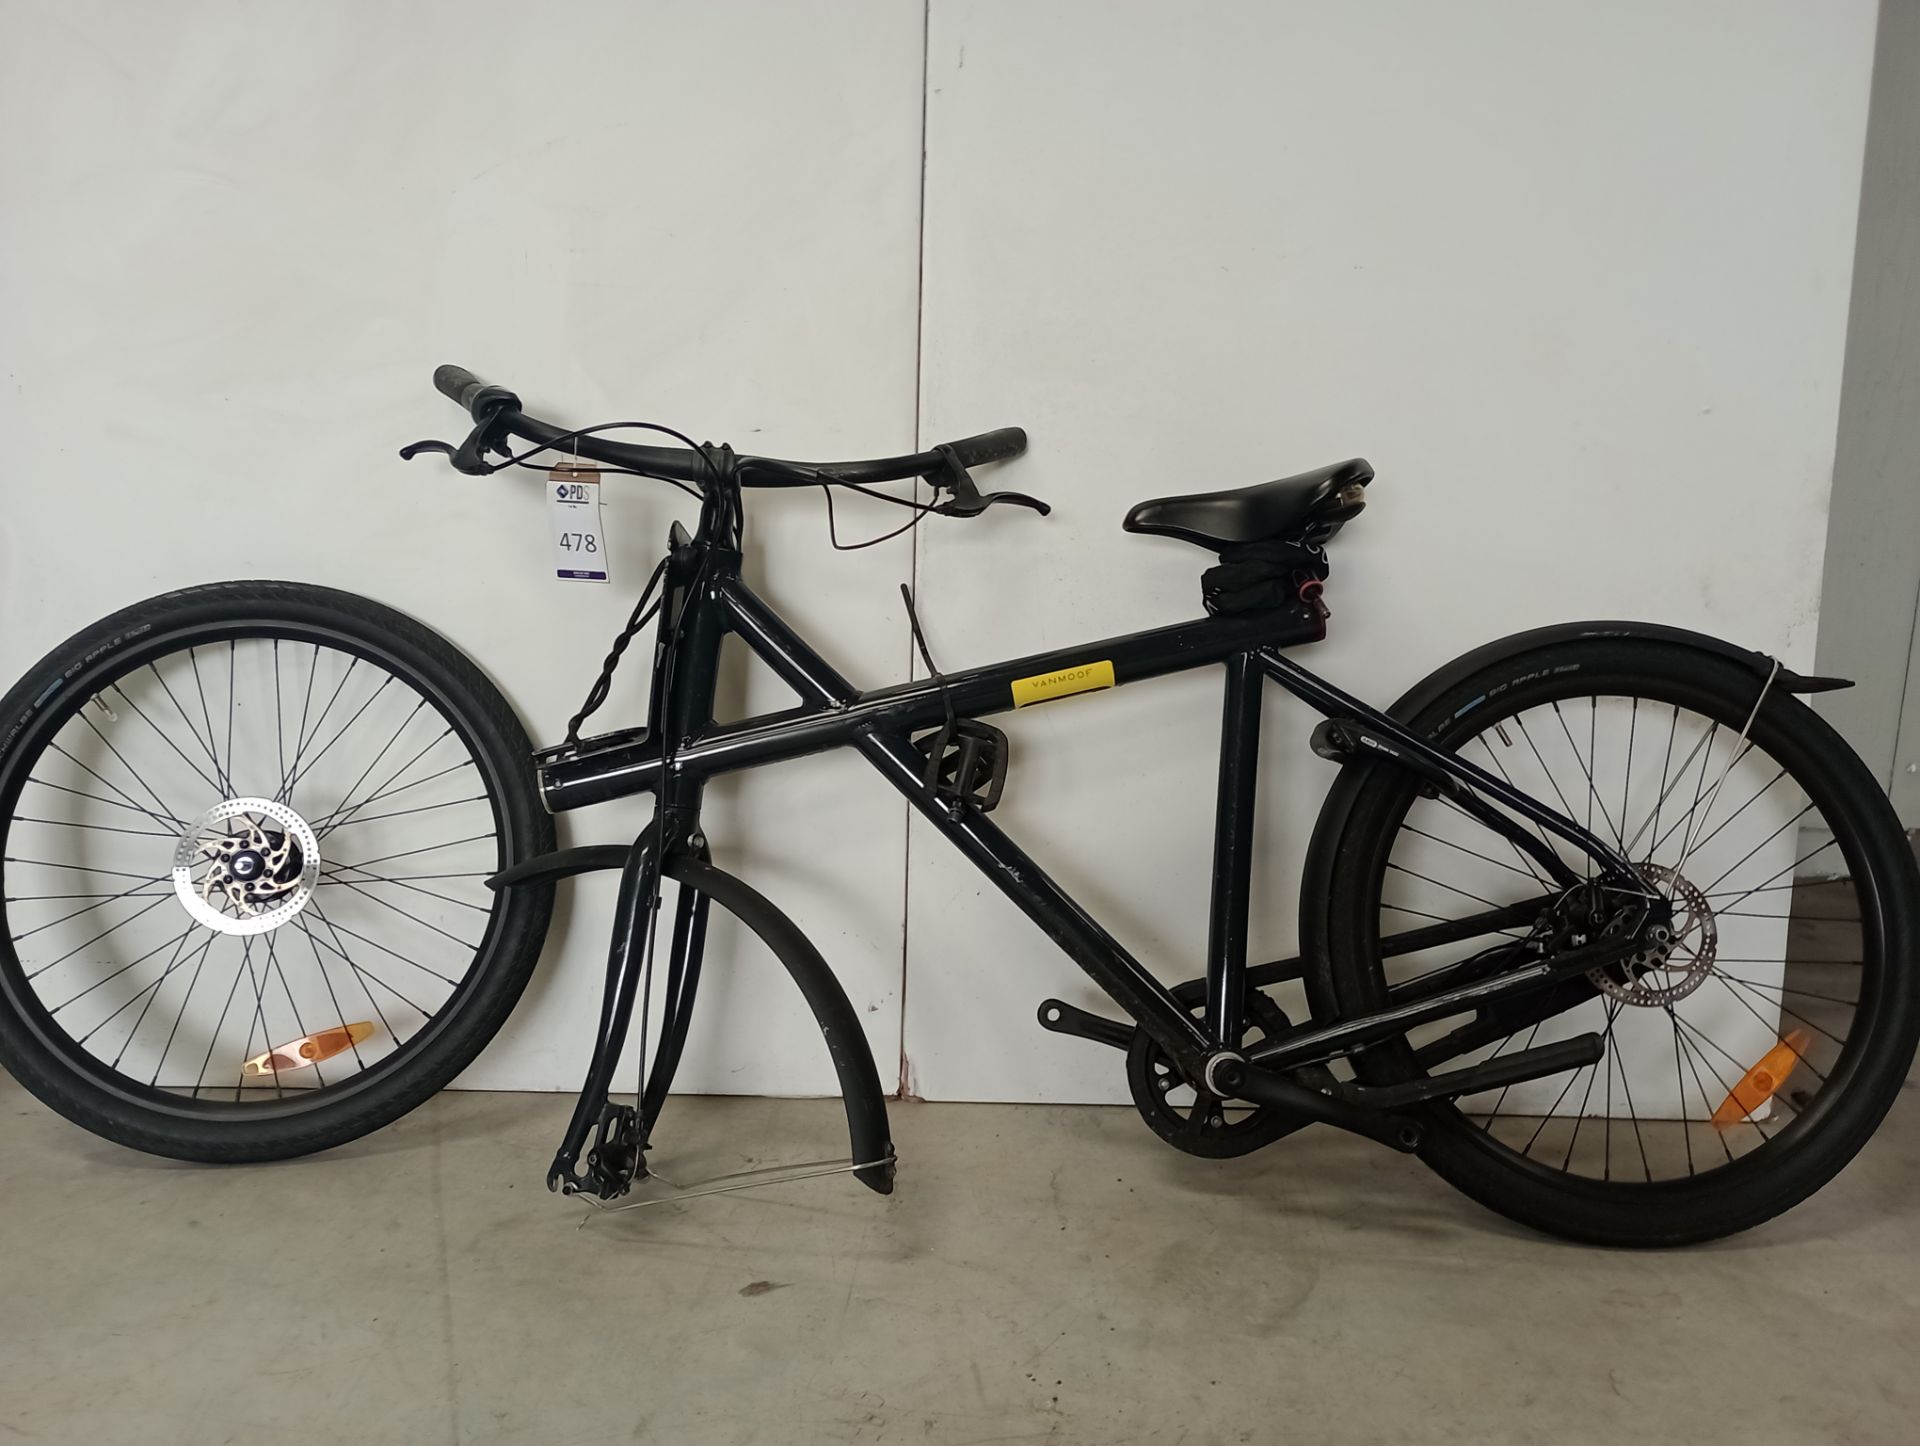 VanMoof Smart X 3 Speed Electric Bike, Frame Number ASN2900010 (NOT ROADWORTHY - FOR SPARES ONLY) (